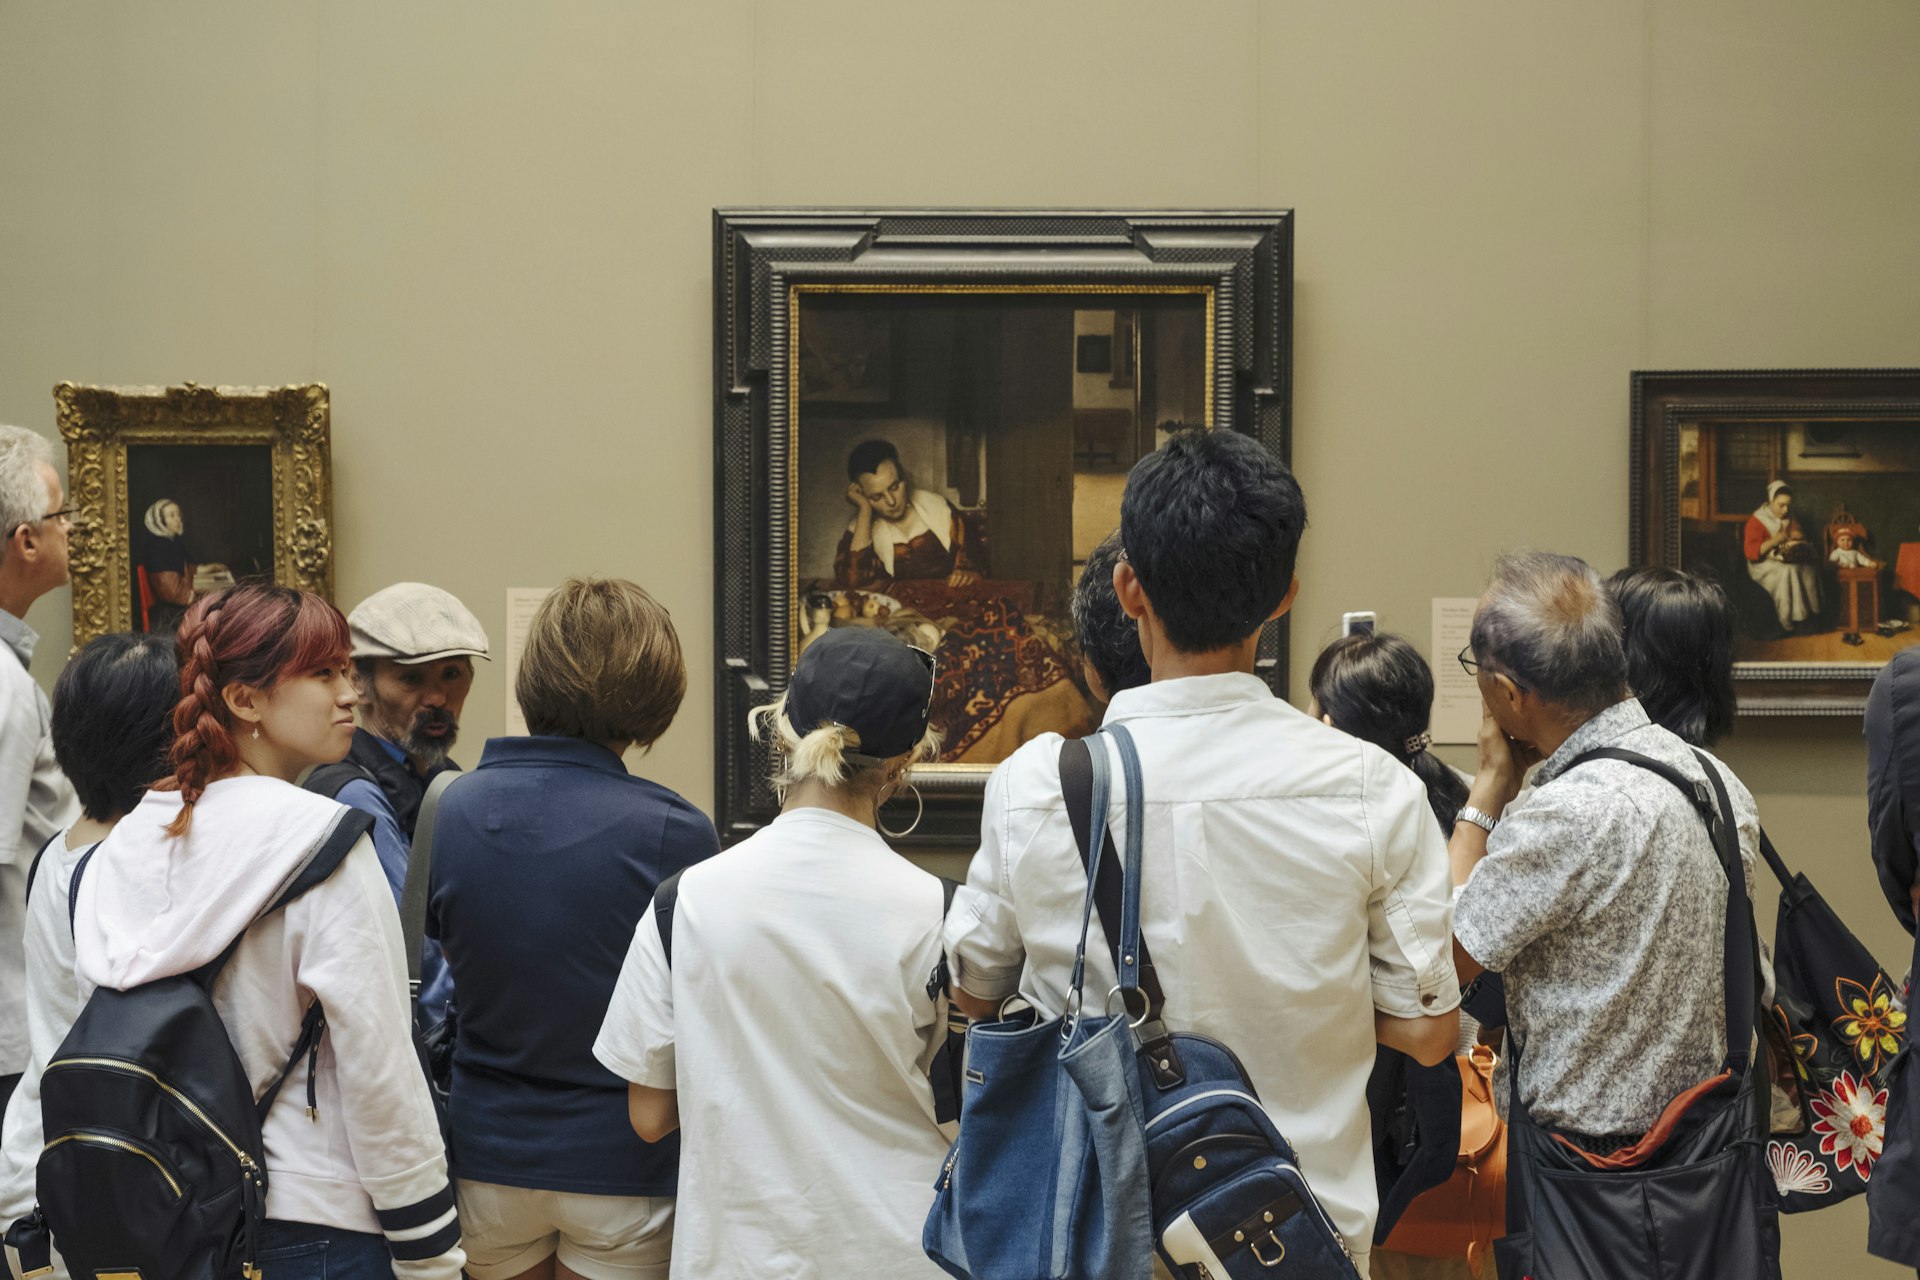 A shot of the backs of a crowd of people inspecting a painting